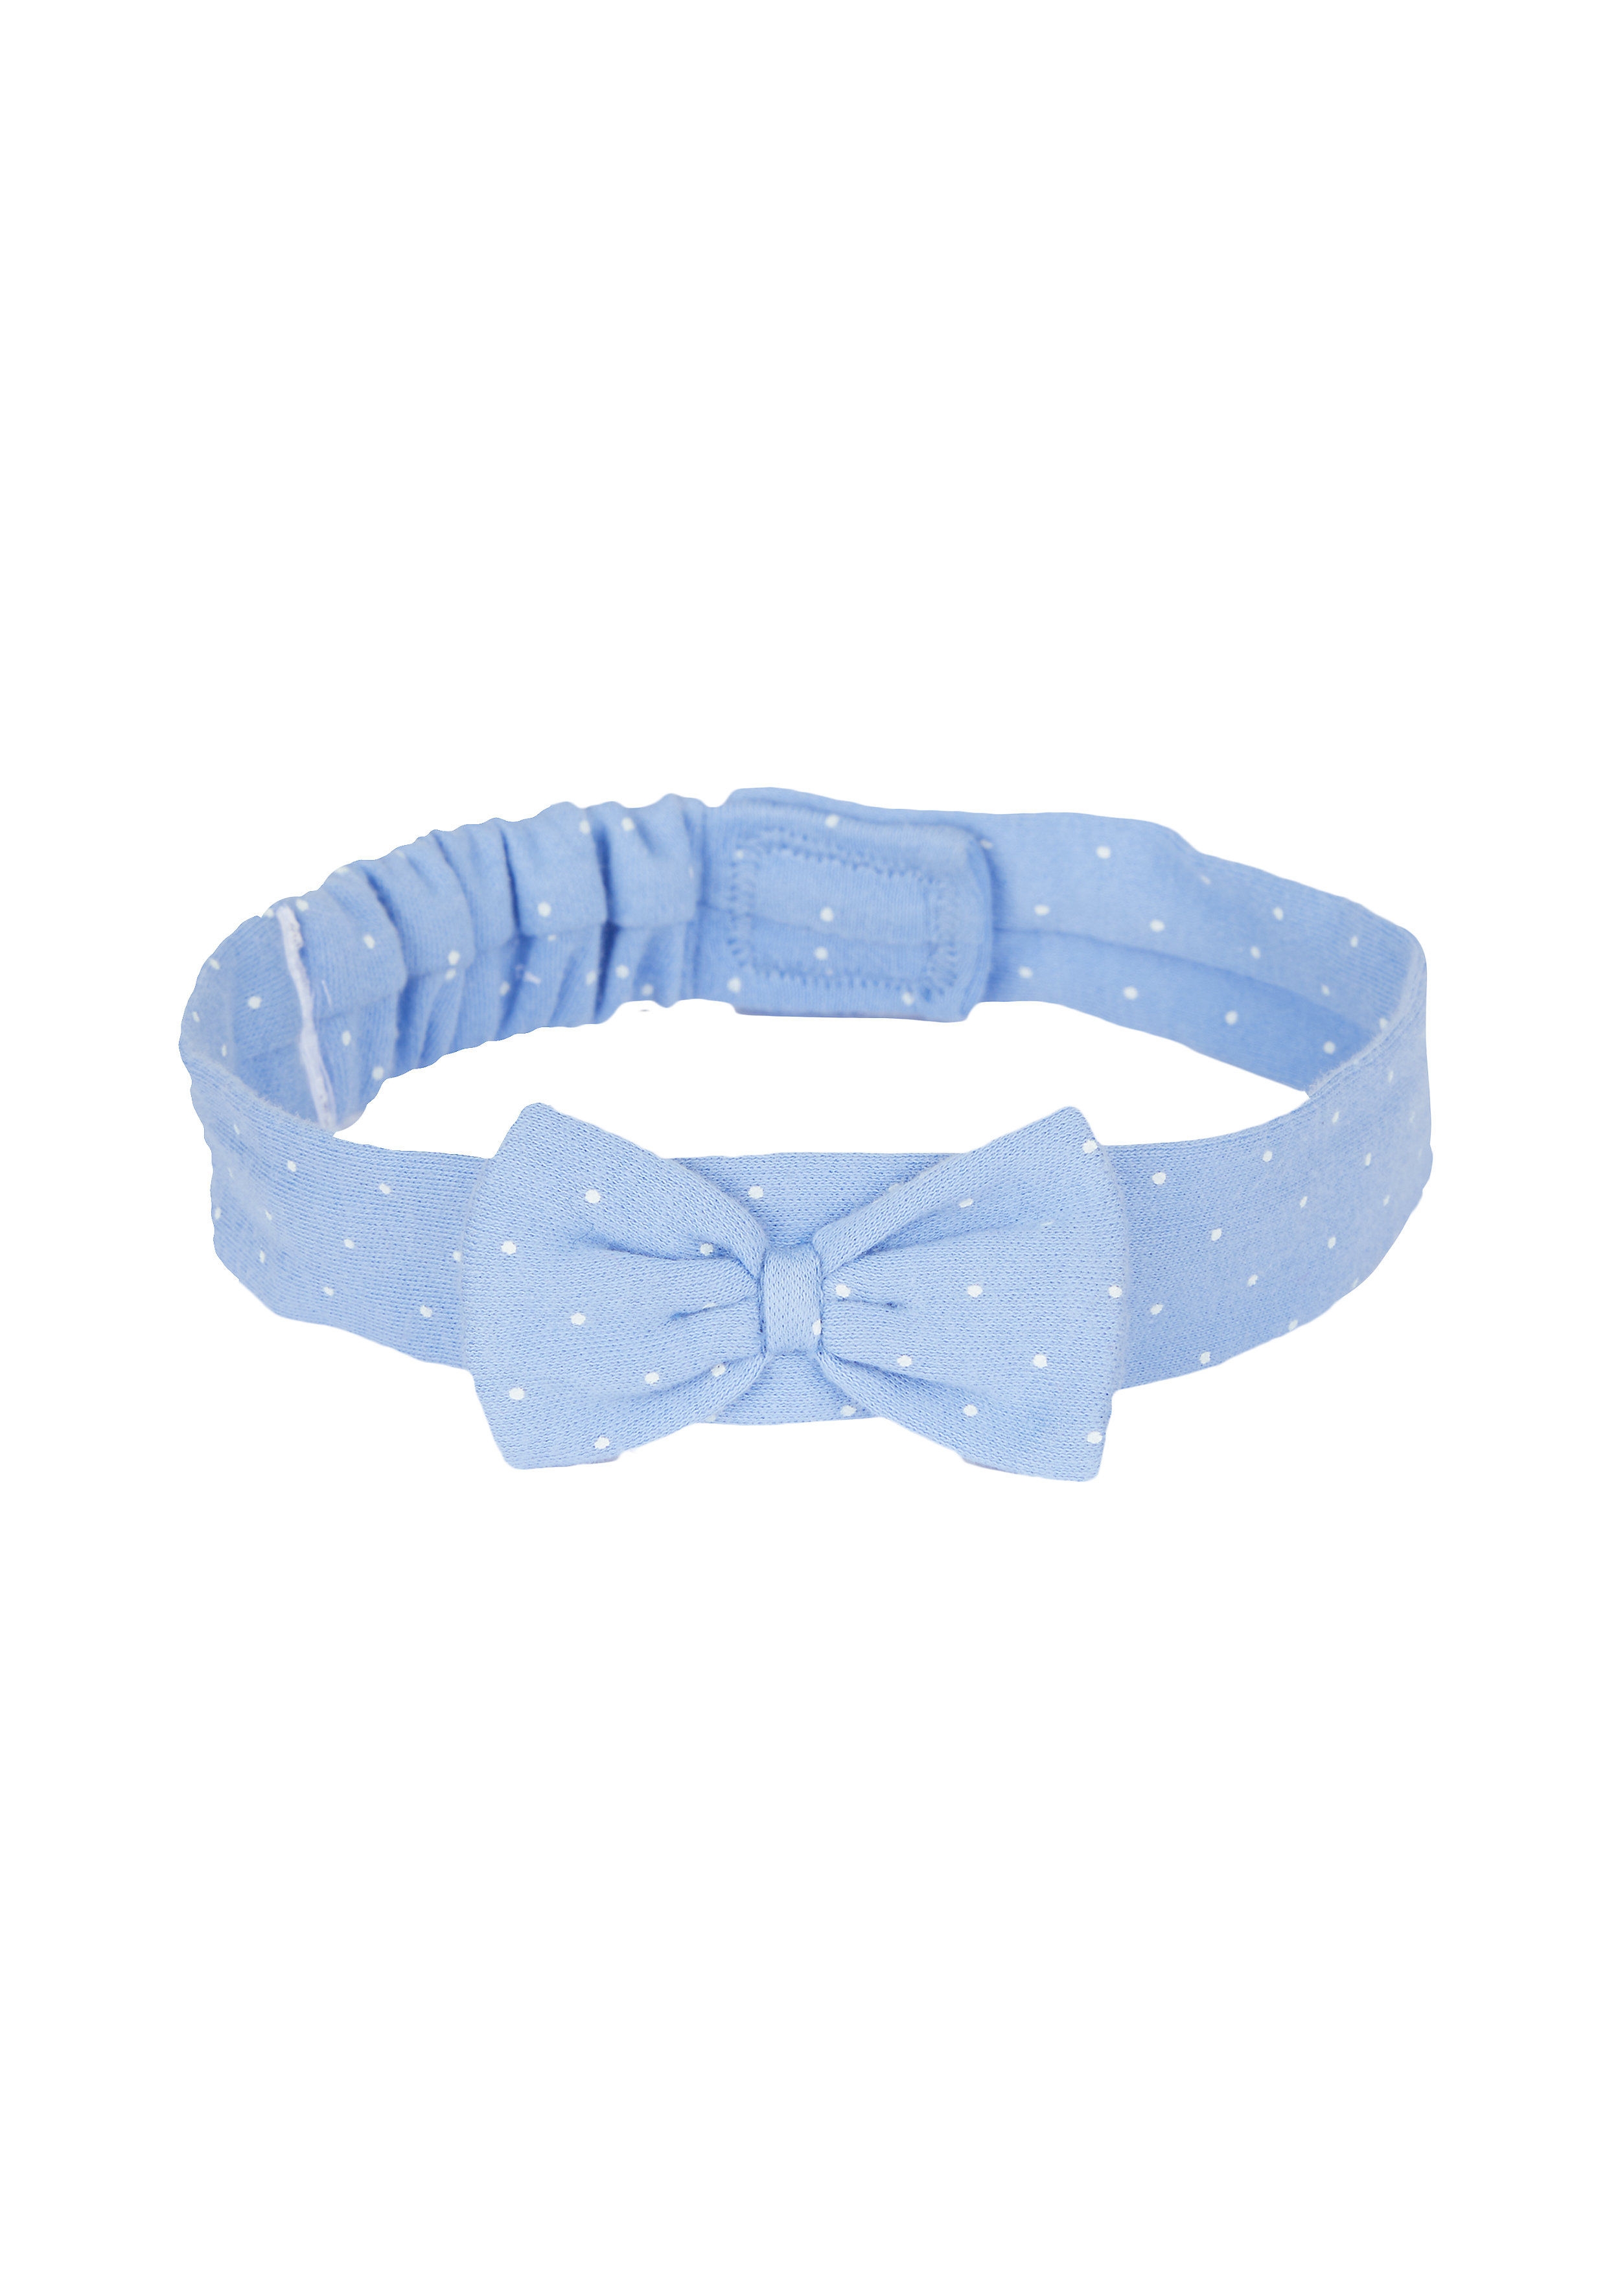 Mothercare | Girls Headband Floral Print - Pack Of 2 - Blue 0